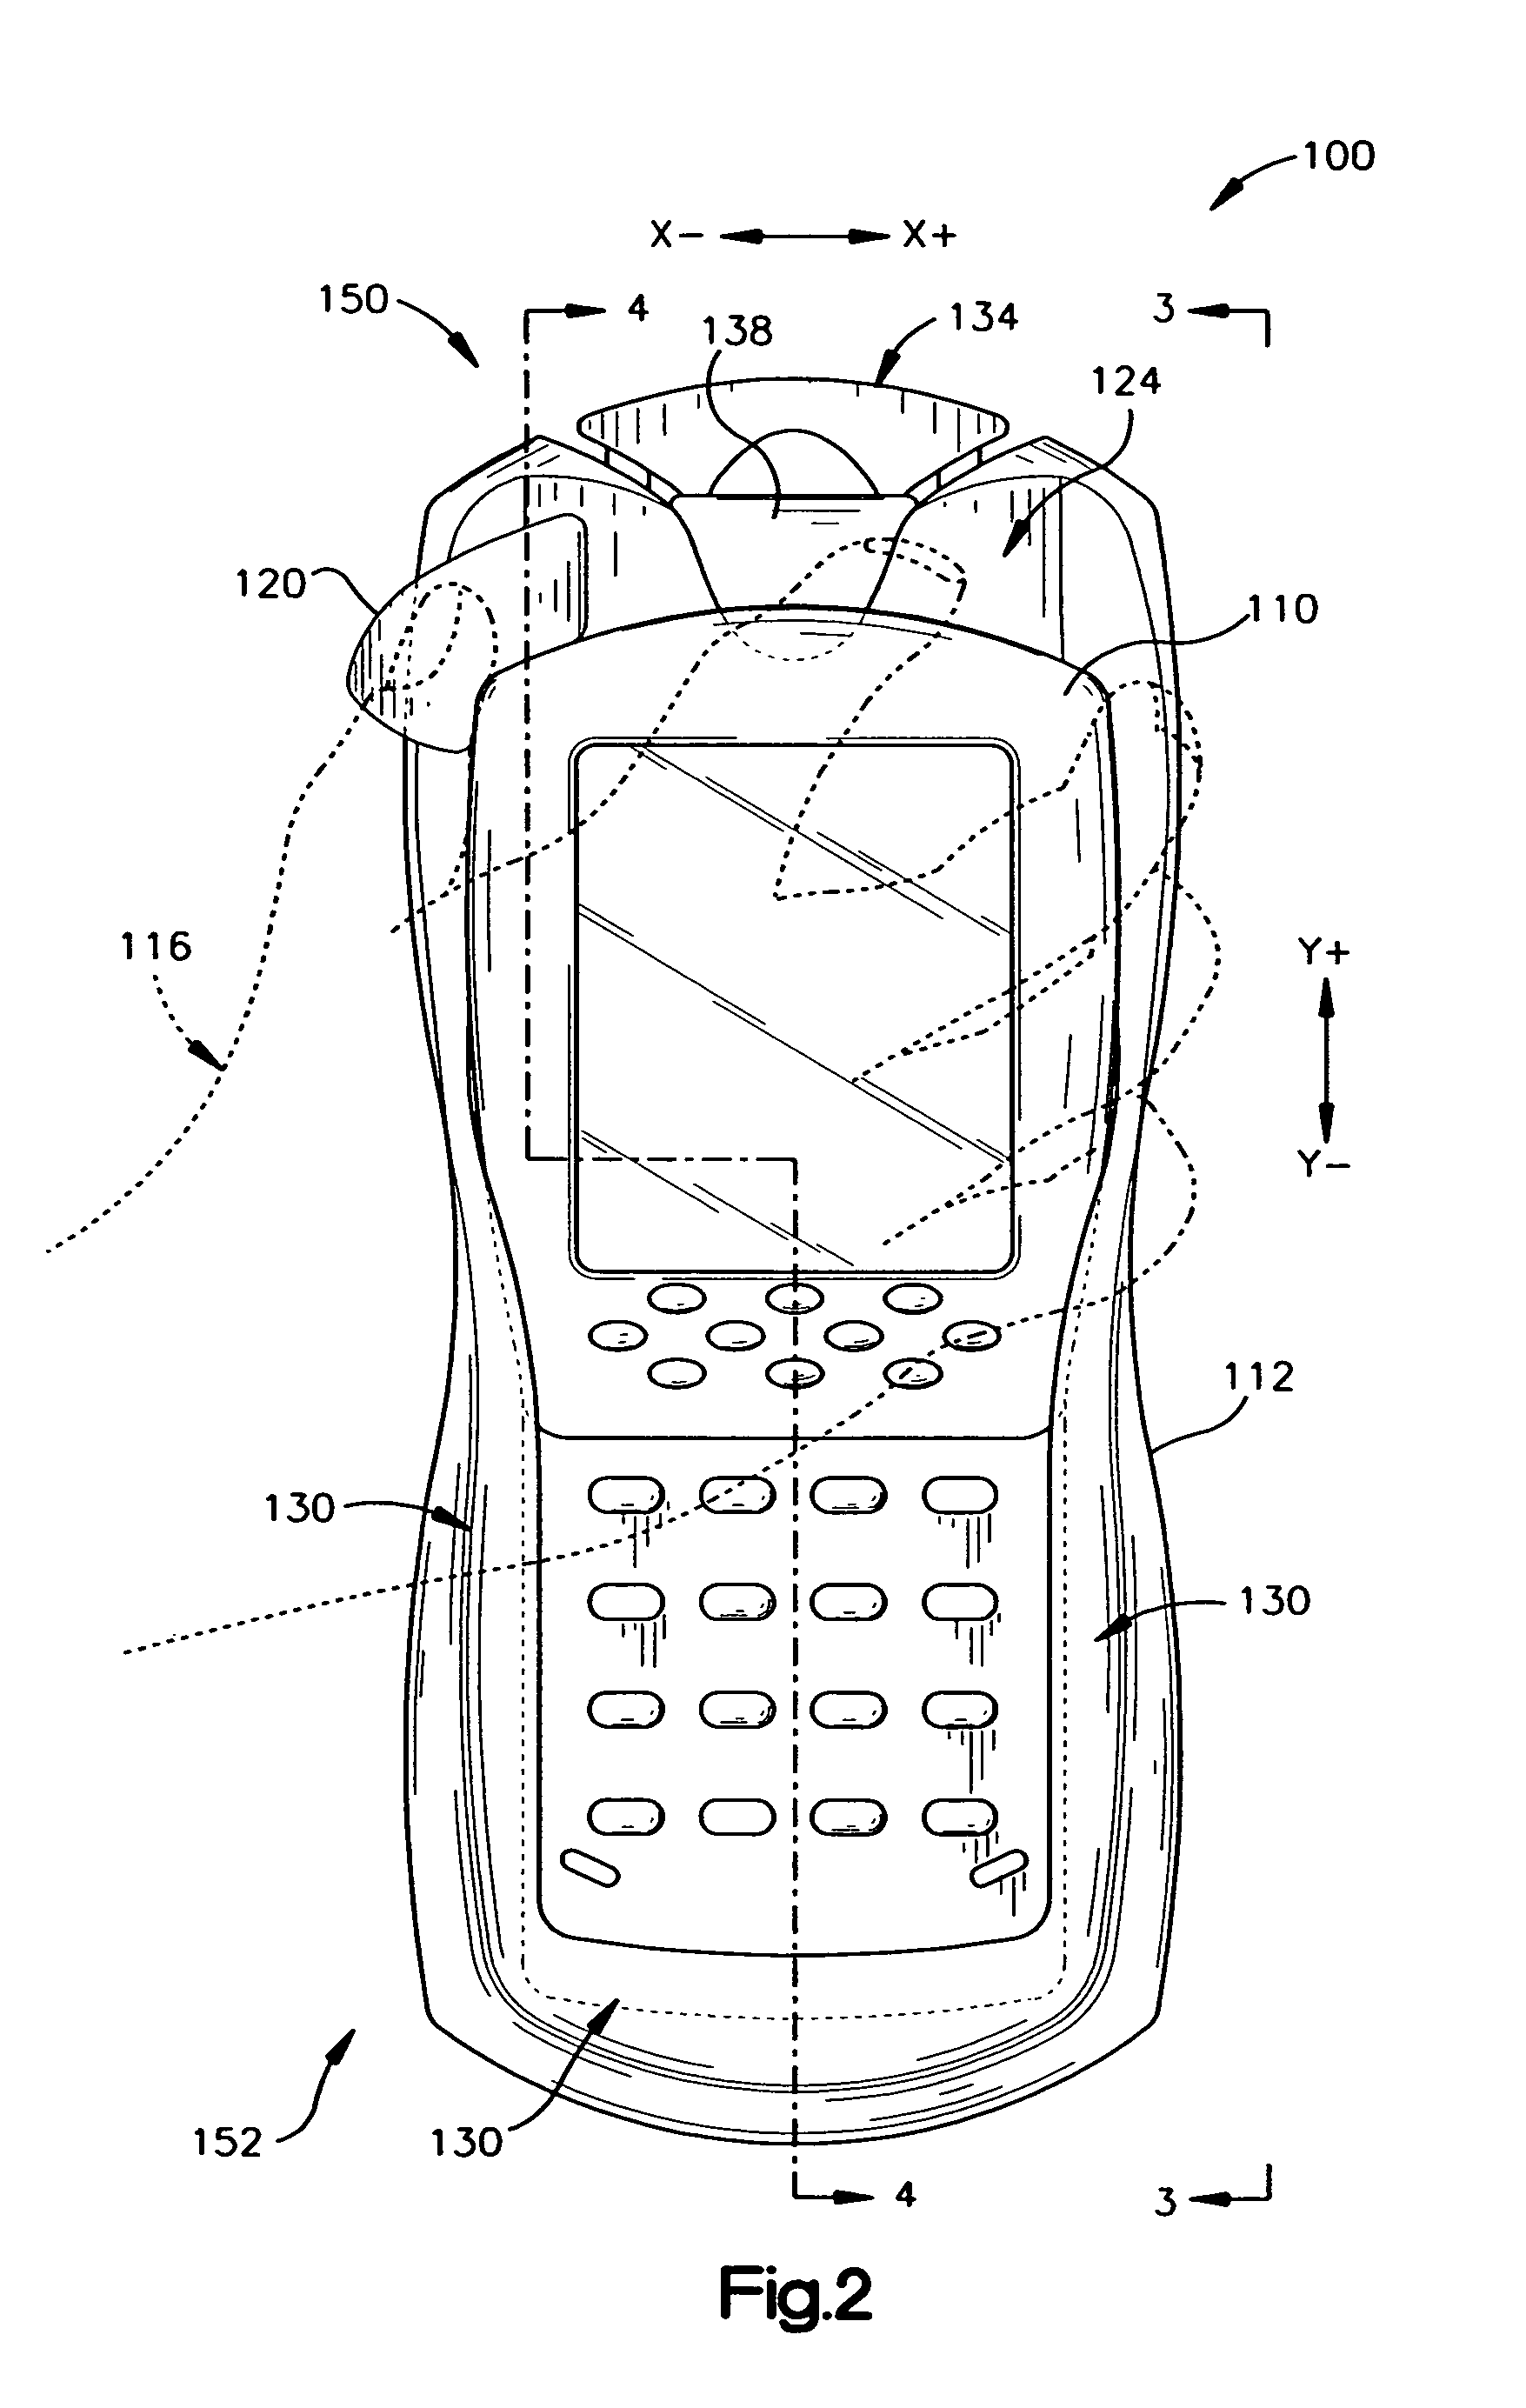 Vehicle cradle system and methodology for hand held devices